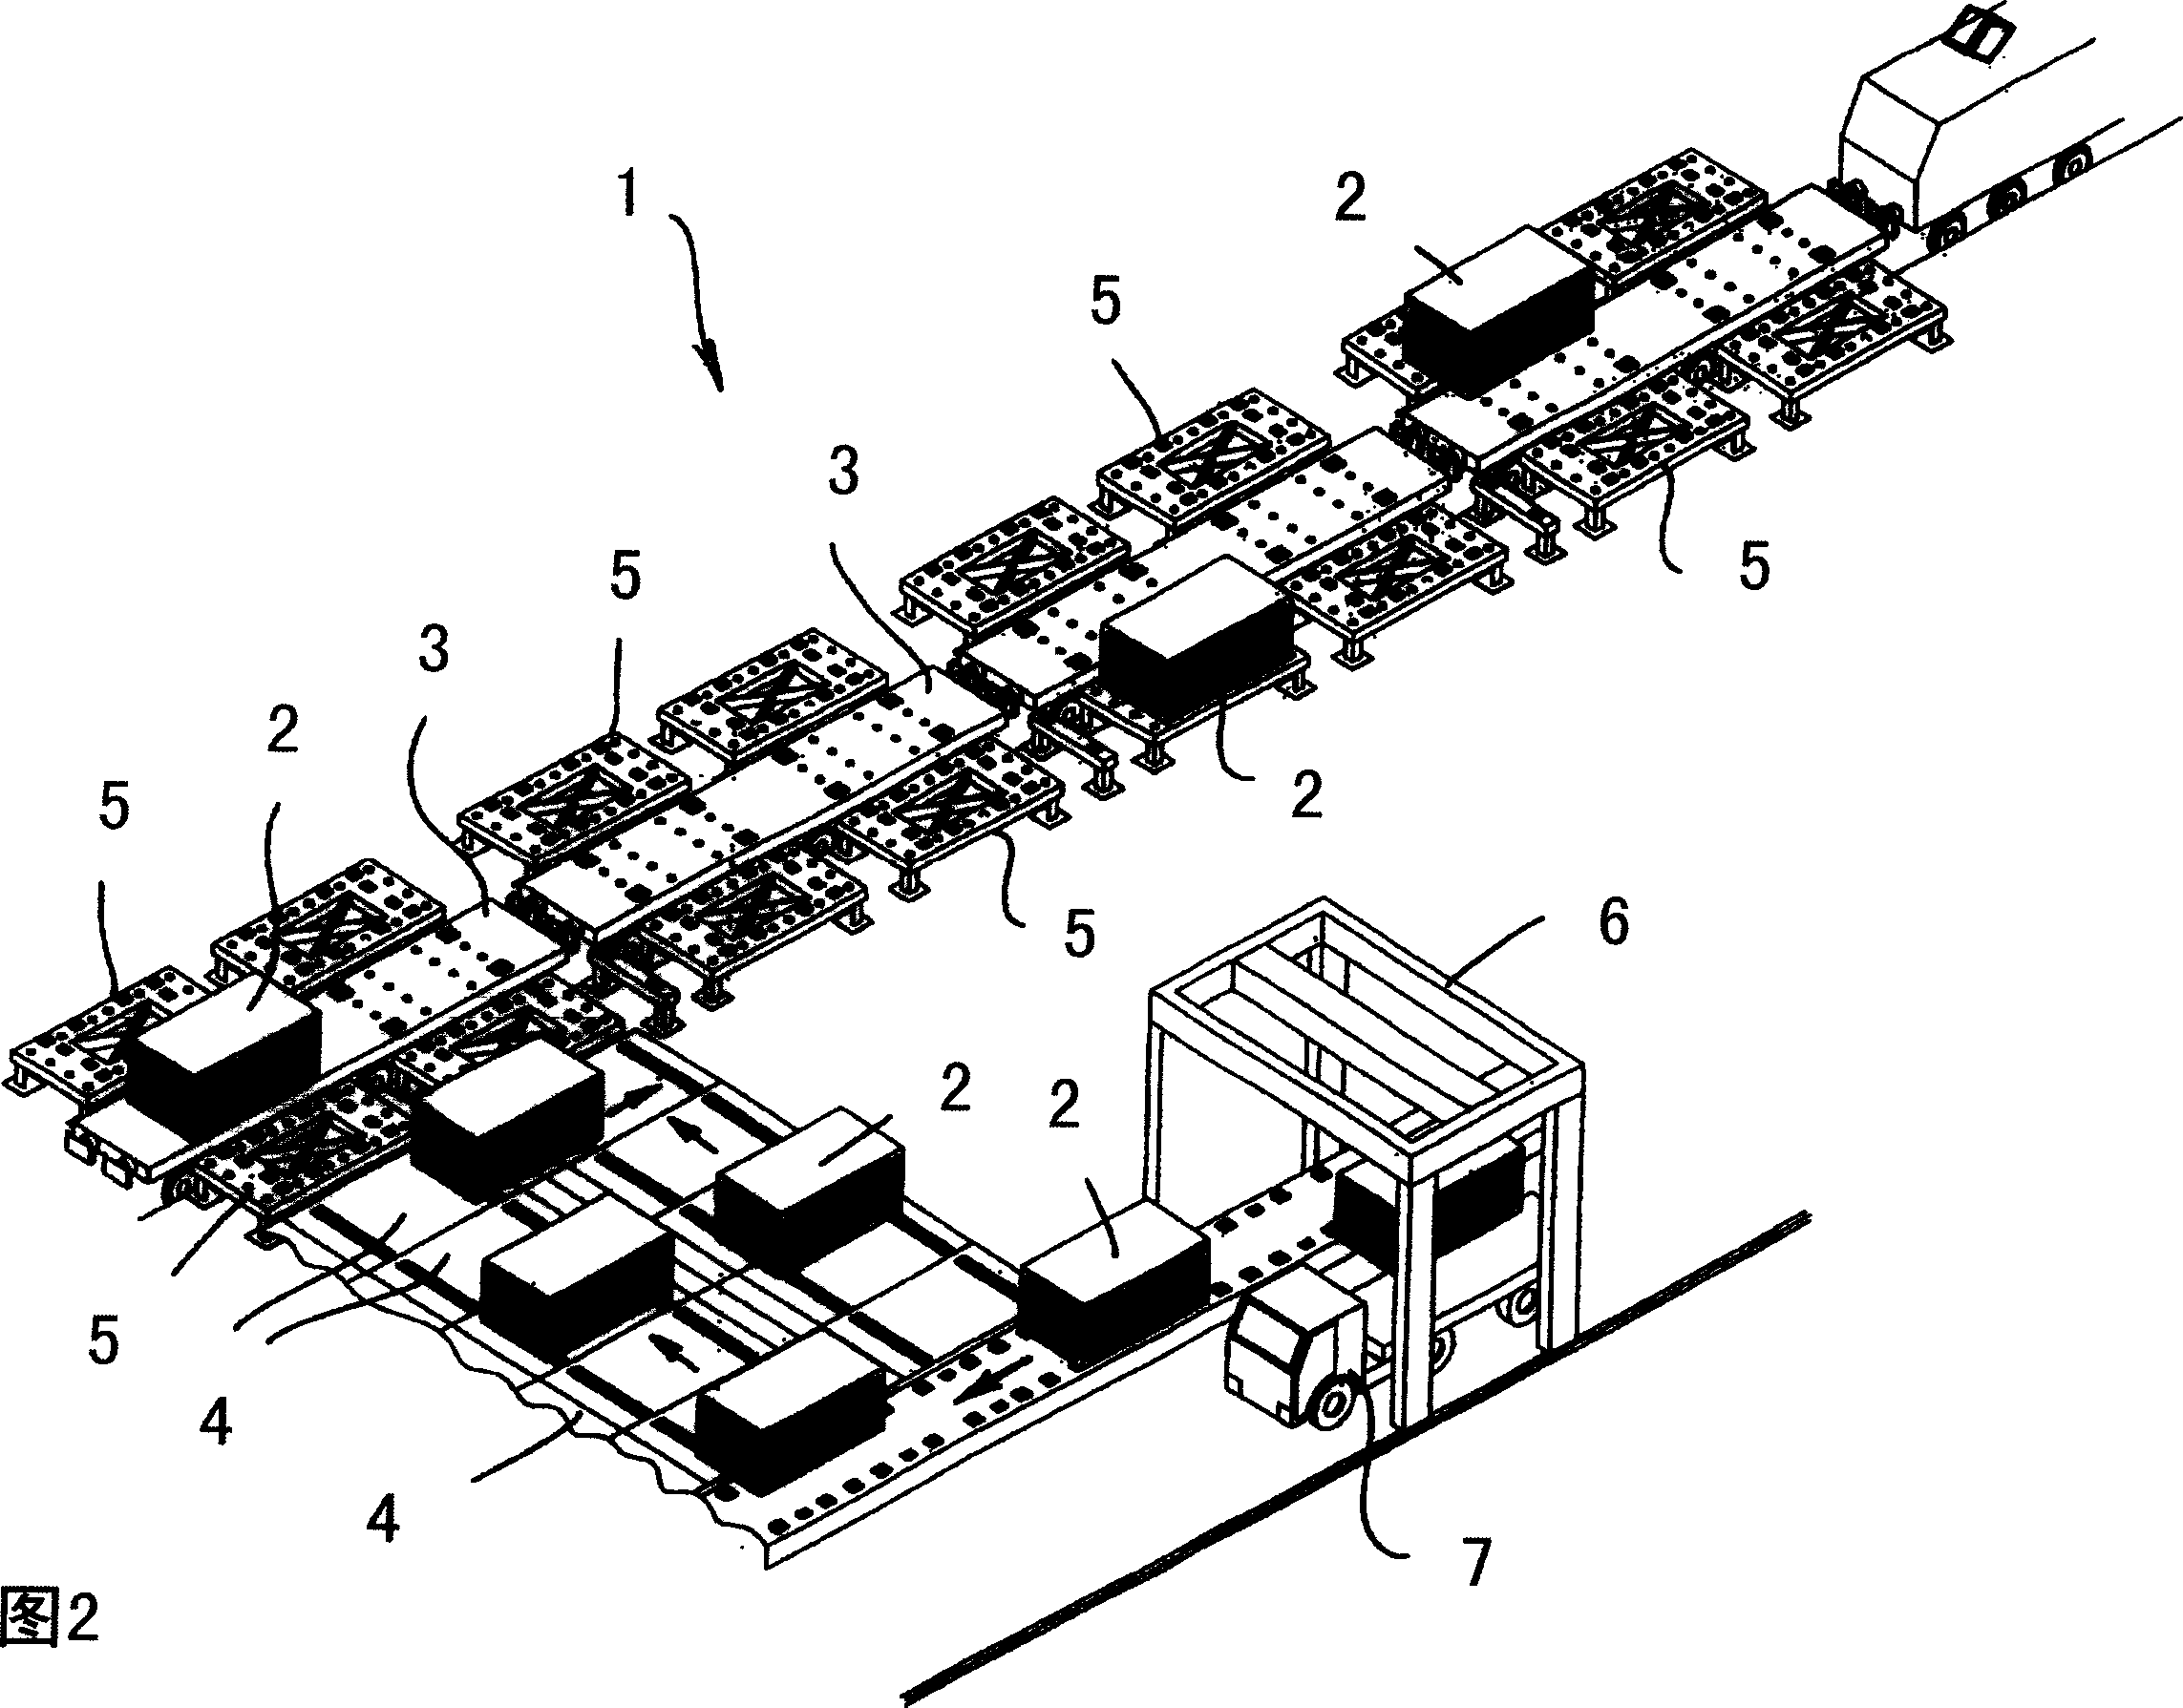 Method for railroad transport and apparatus for loading and unloading trains